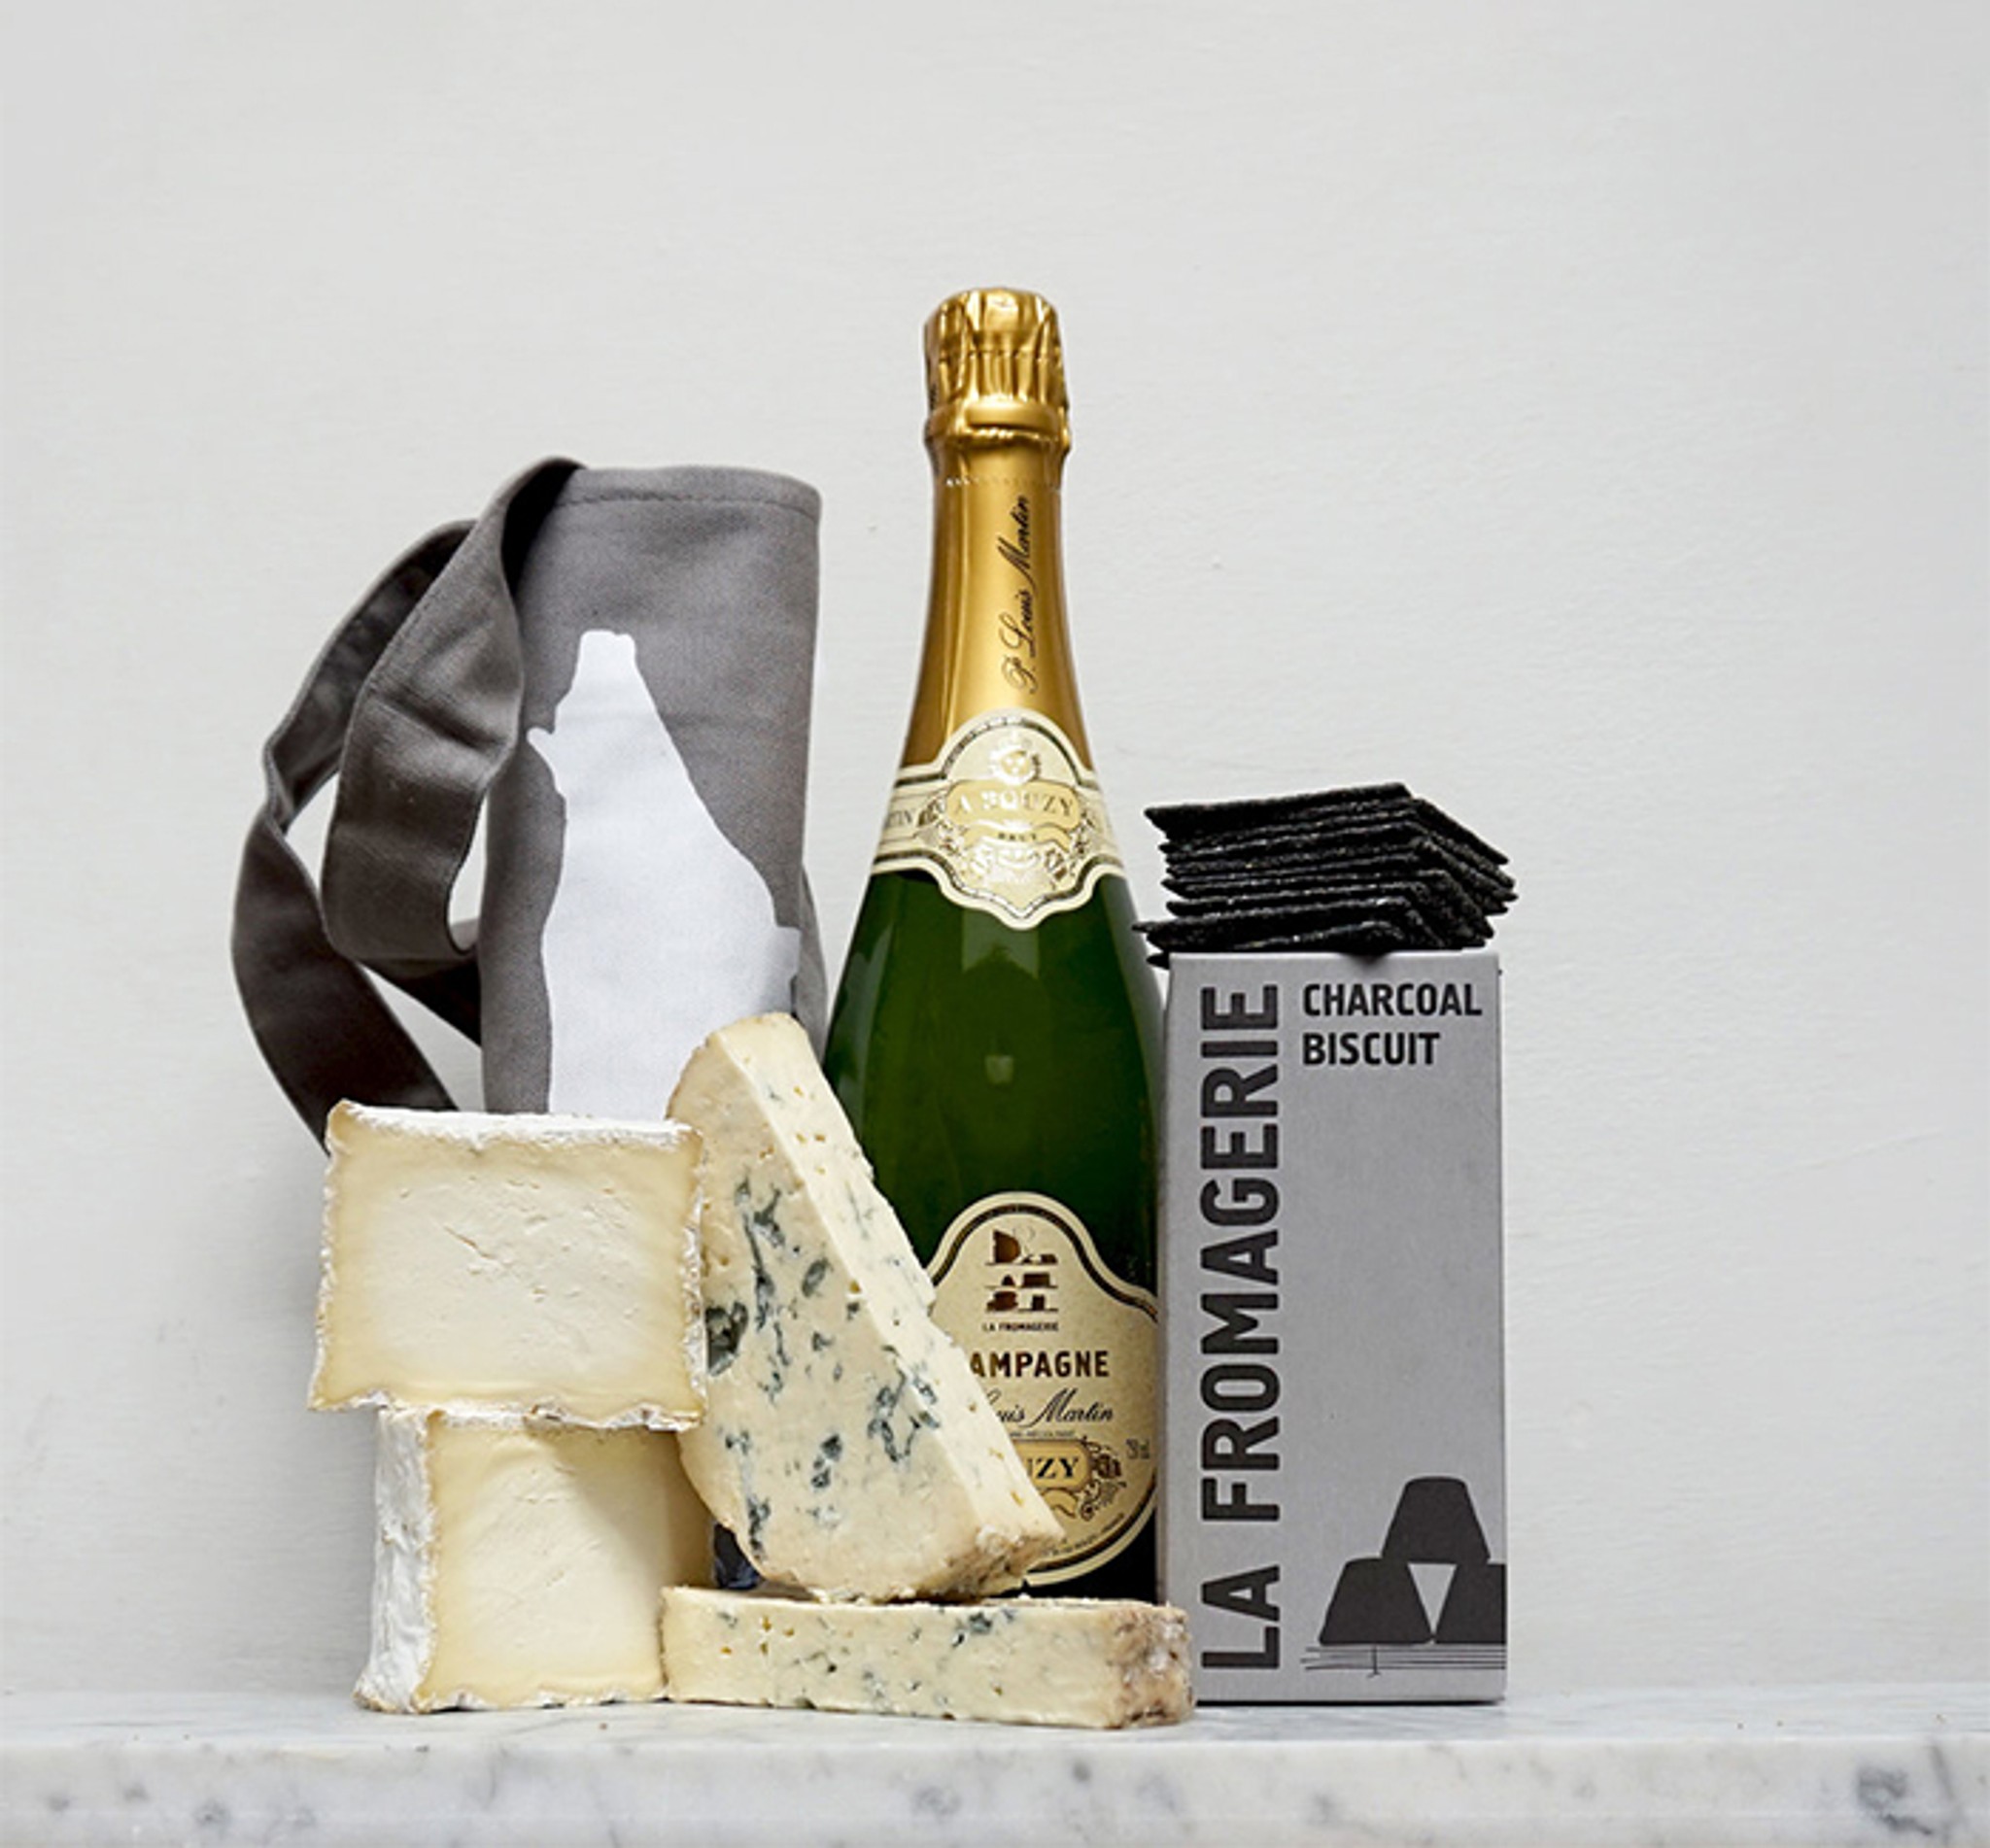 Cheese and champagne box from La Fromagerie